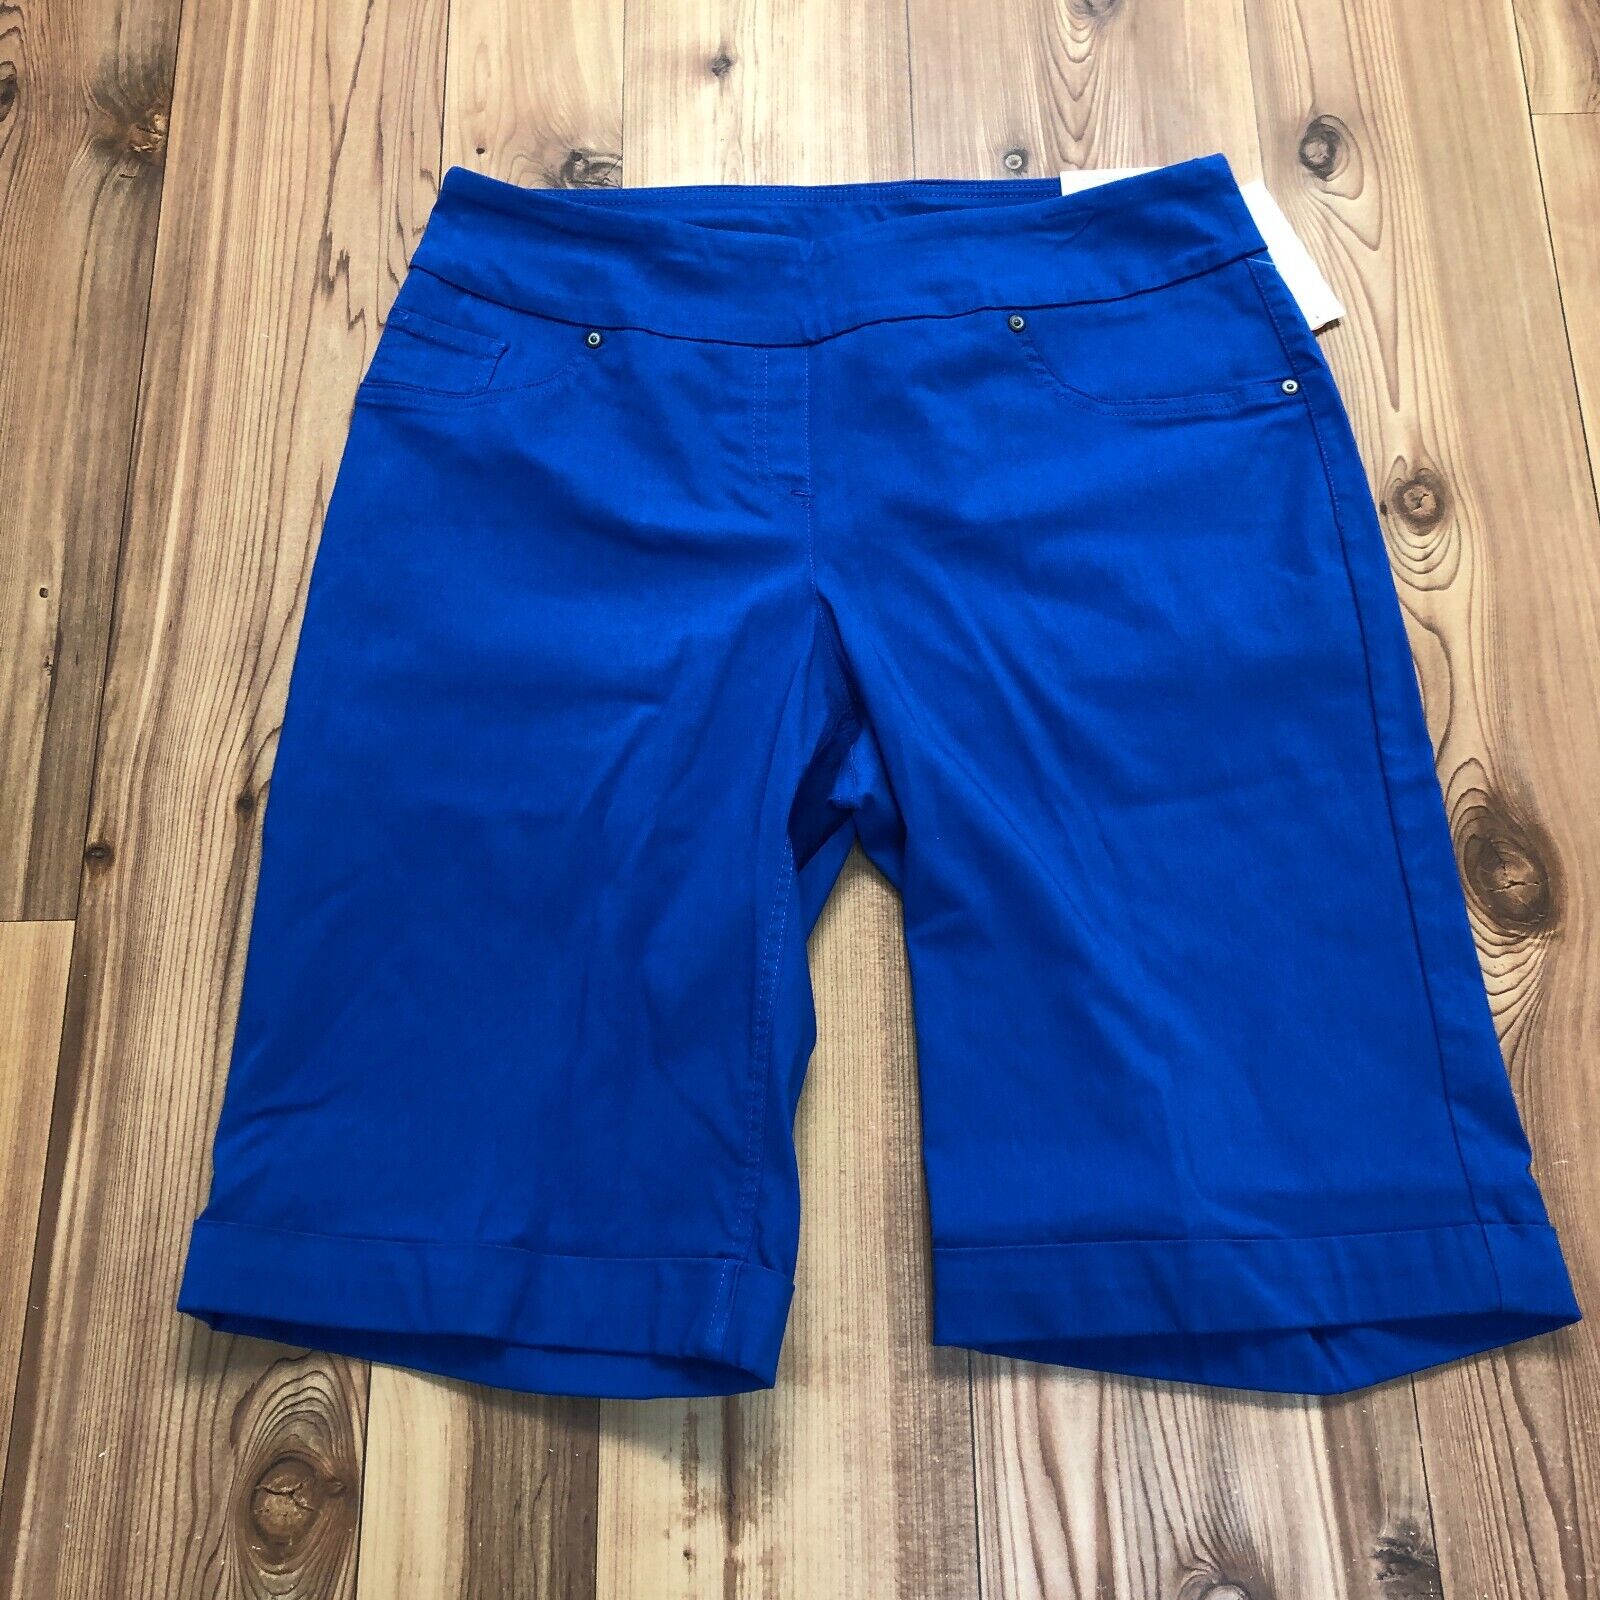 NEW Westbound Blue Slimming Solid Chino Regular Fit Shorts Women's Size 16